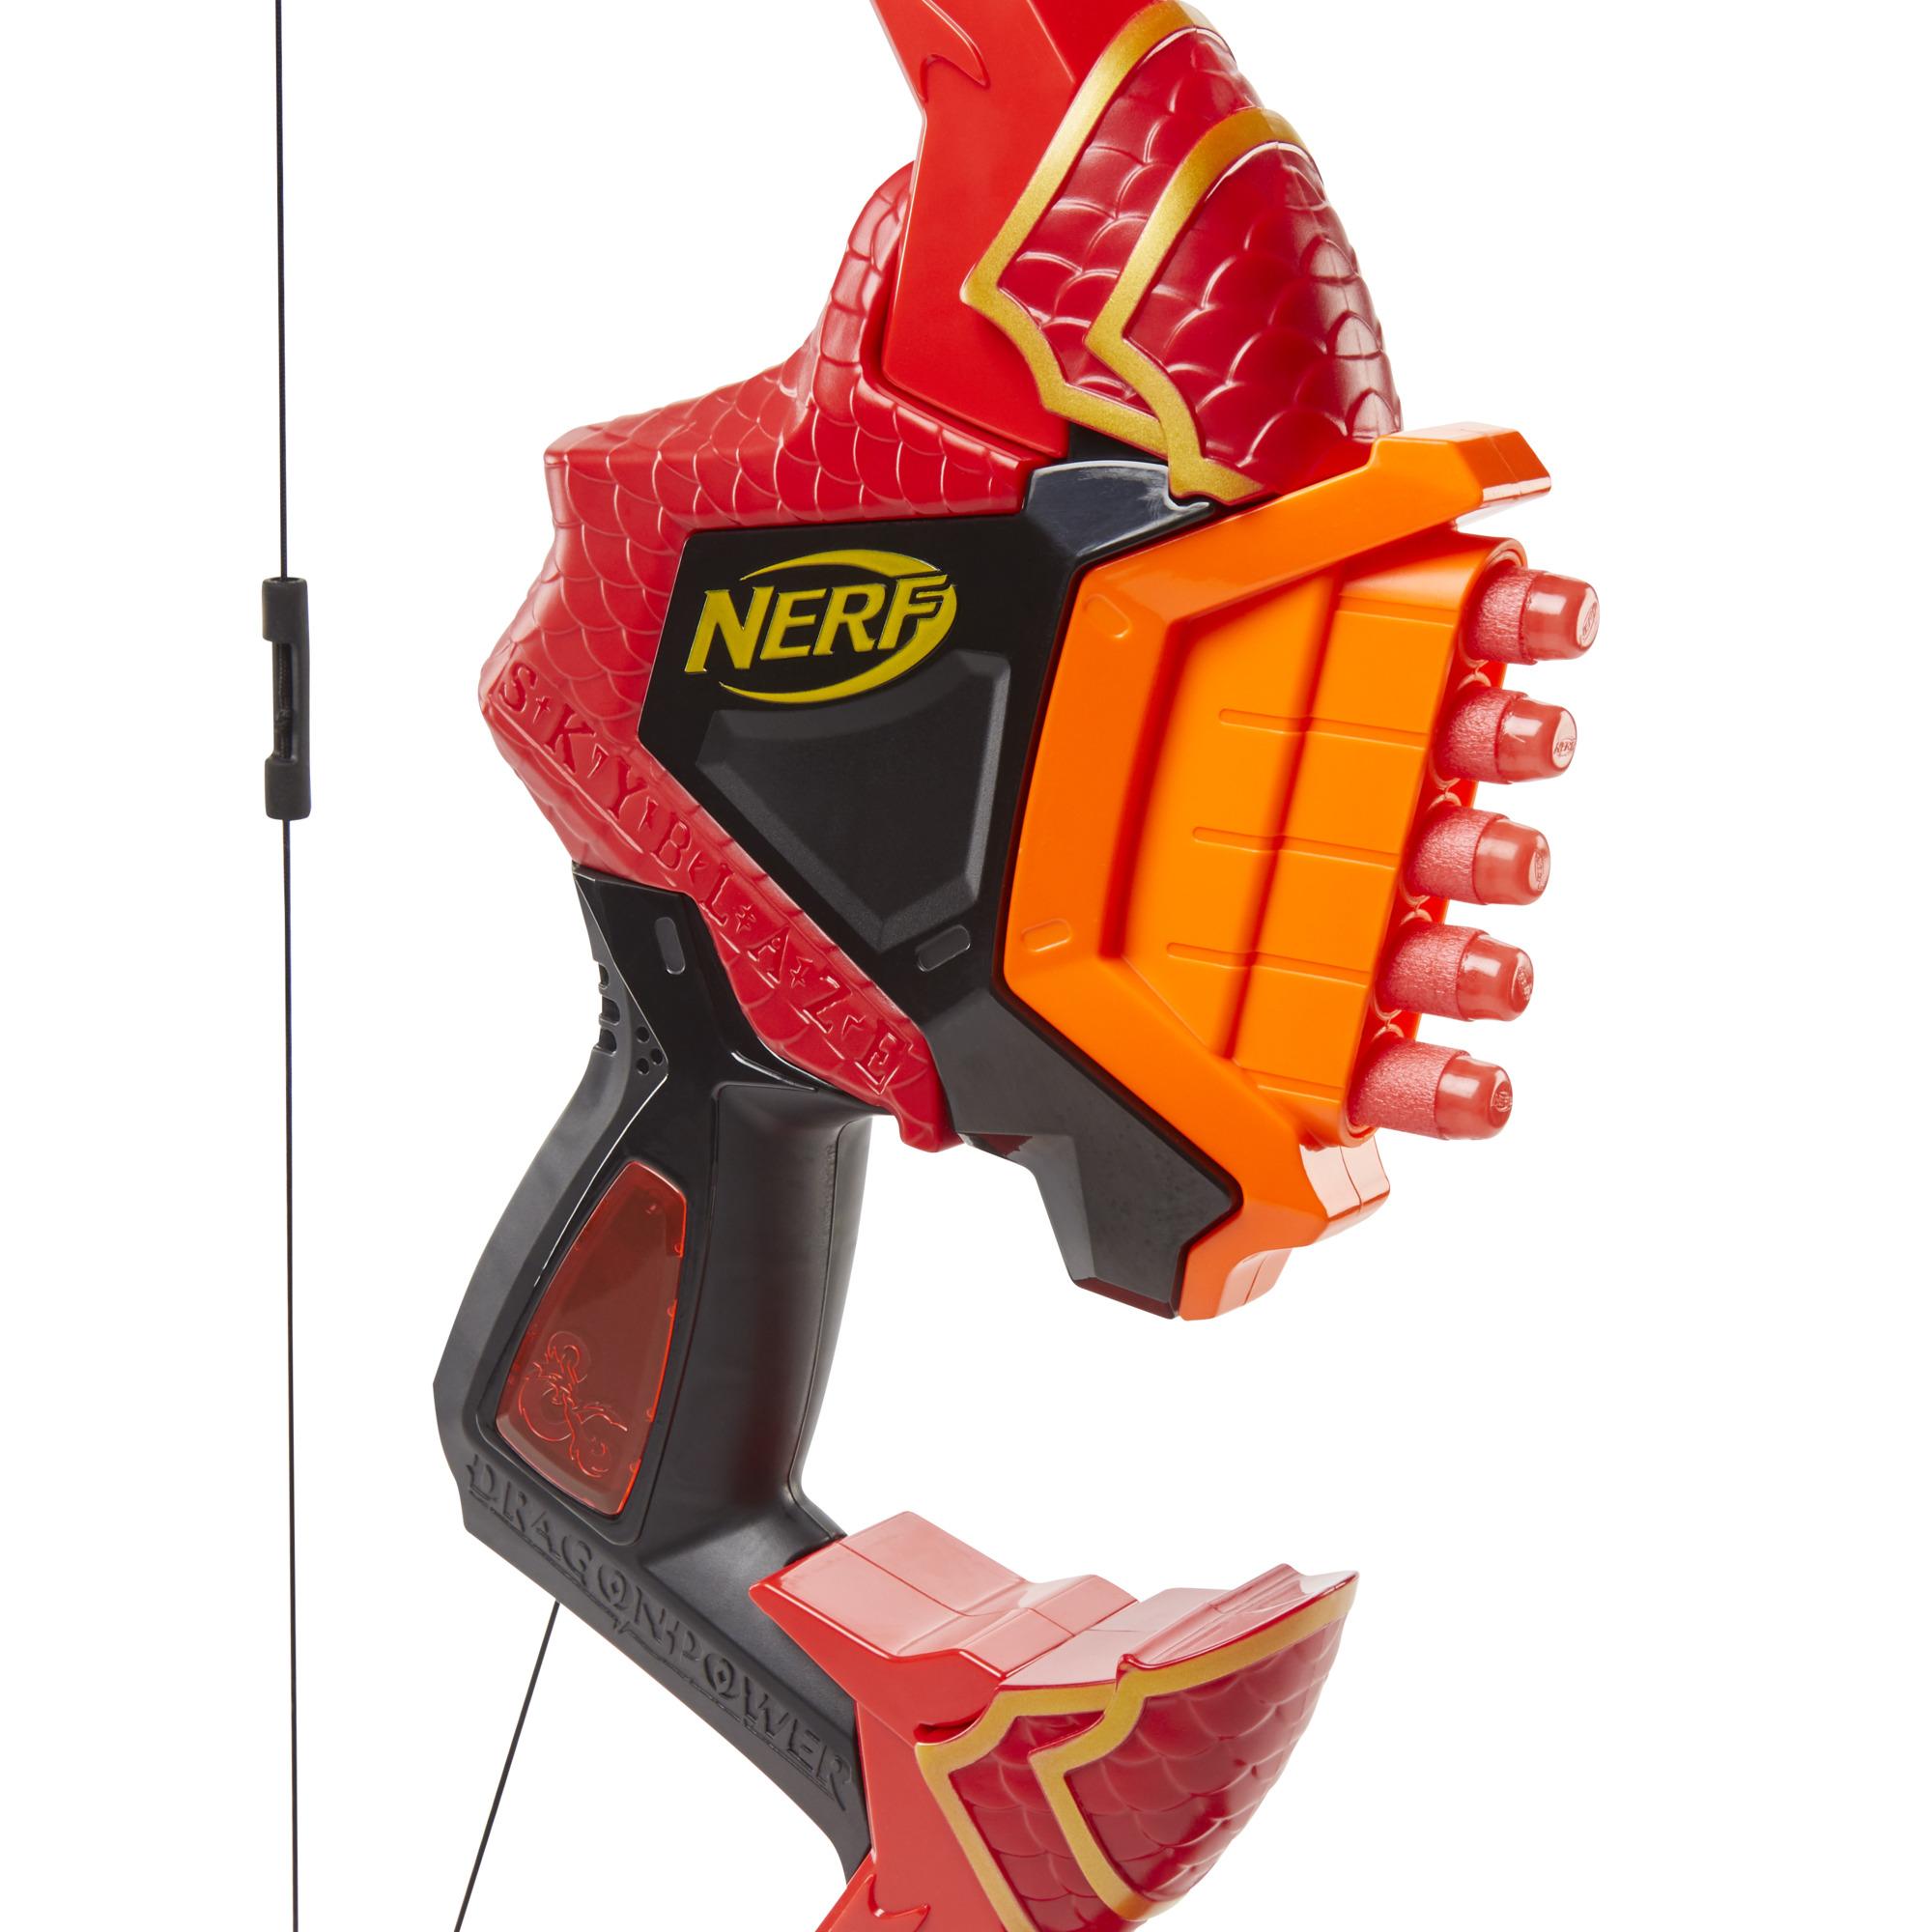 Nerf DragonPower Dart Bow, Inspired by Dungeons and Dragons, Dragon Bow Action, 10 Nerf Darts, 5-Dart Storage - Nerf